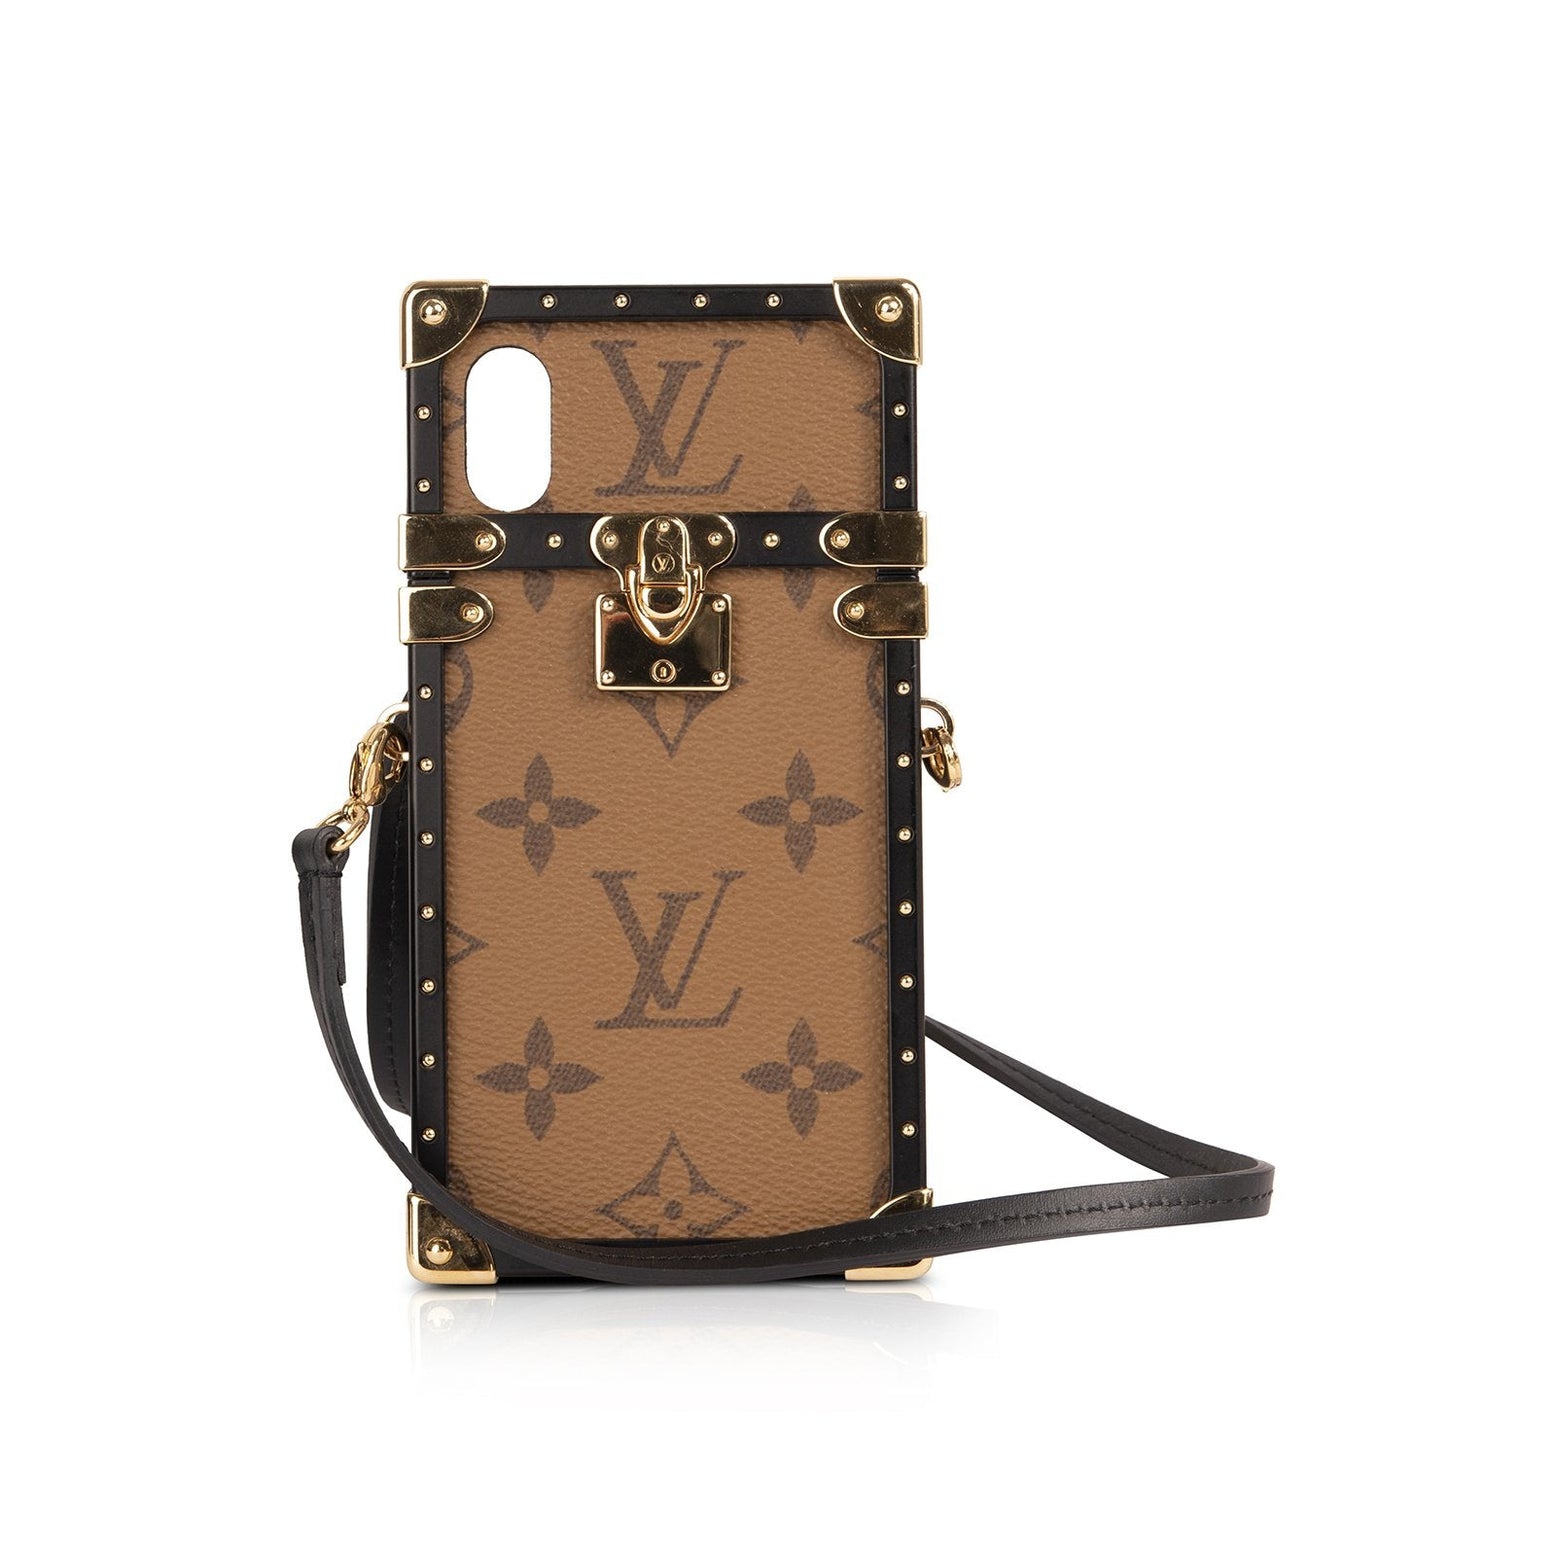 This Louis Vuitton iPhone case will cost you 5500